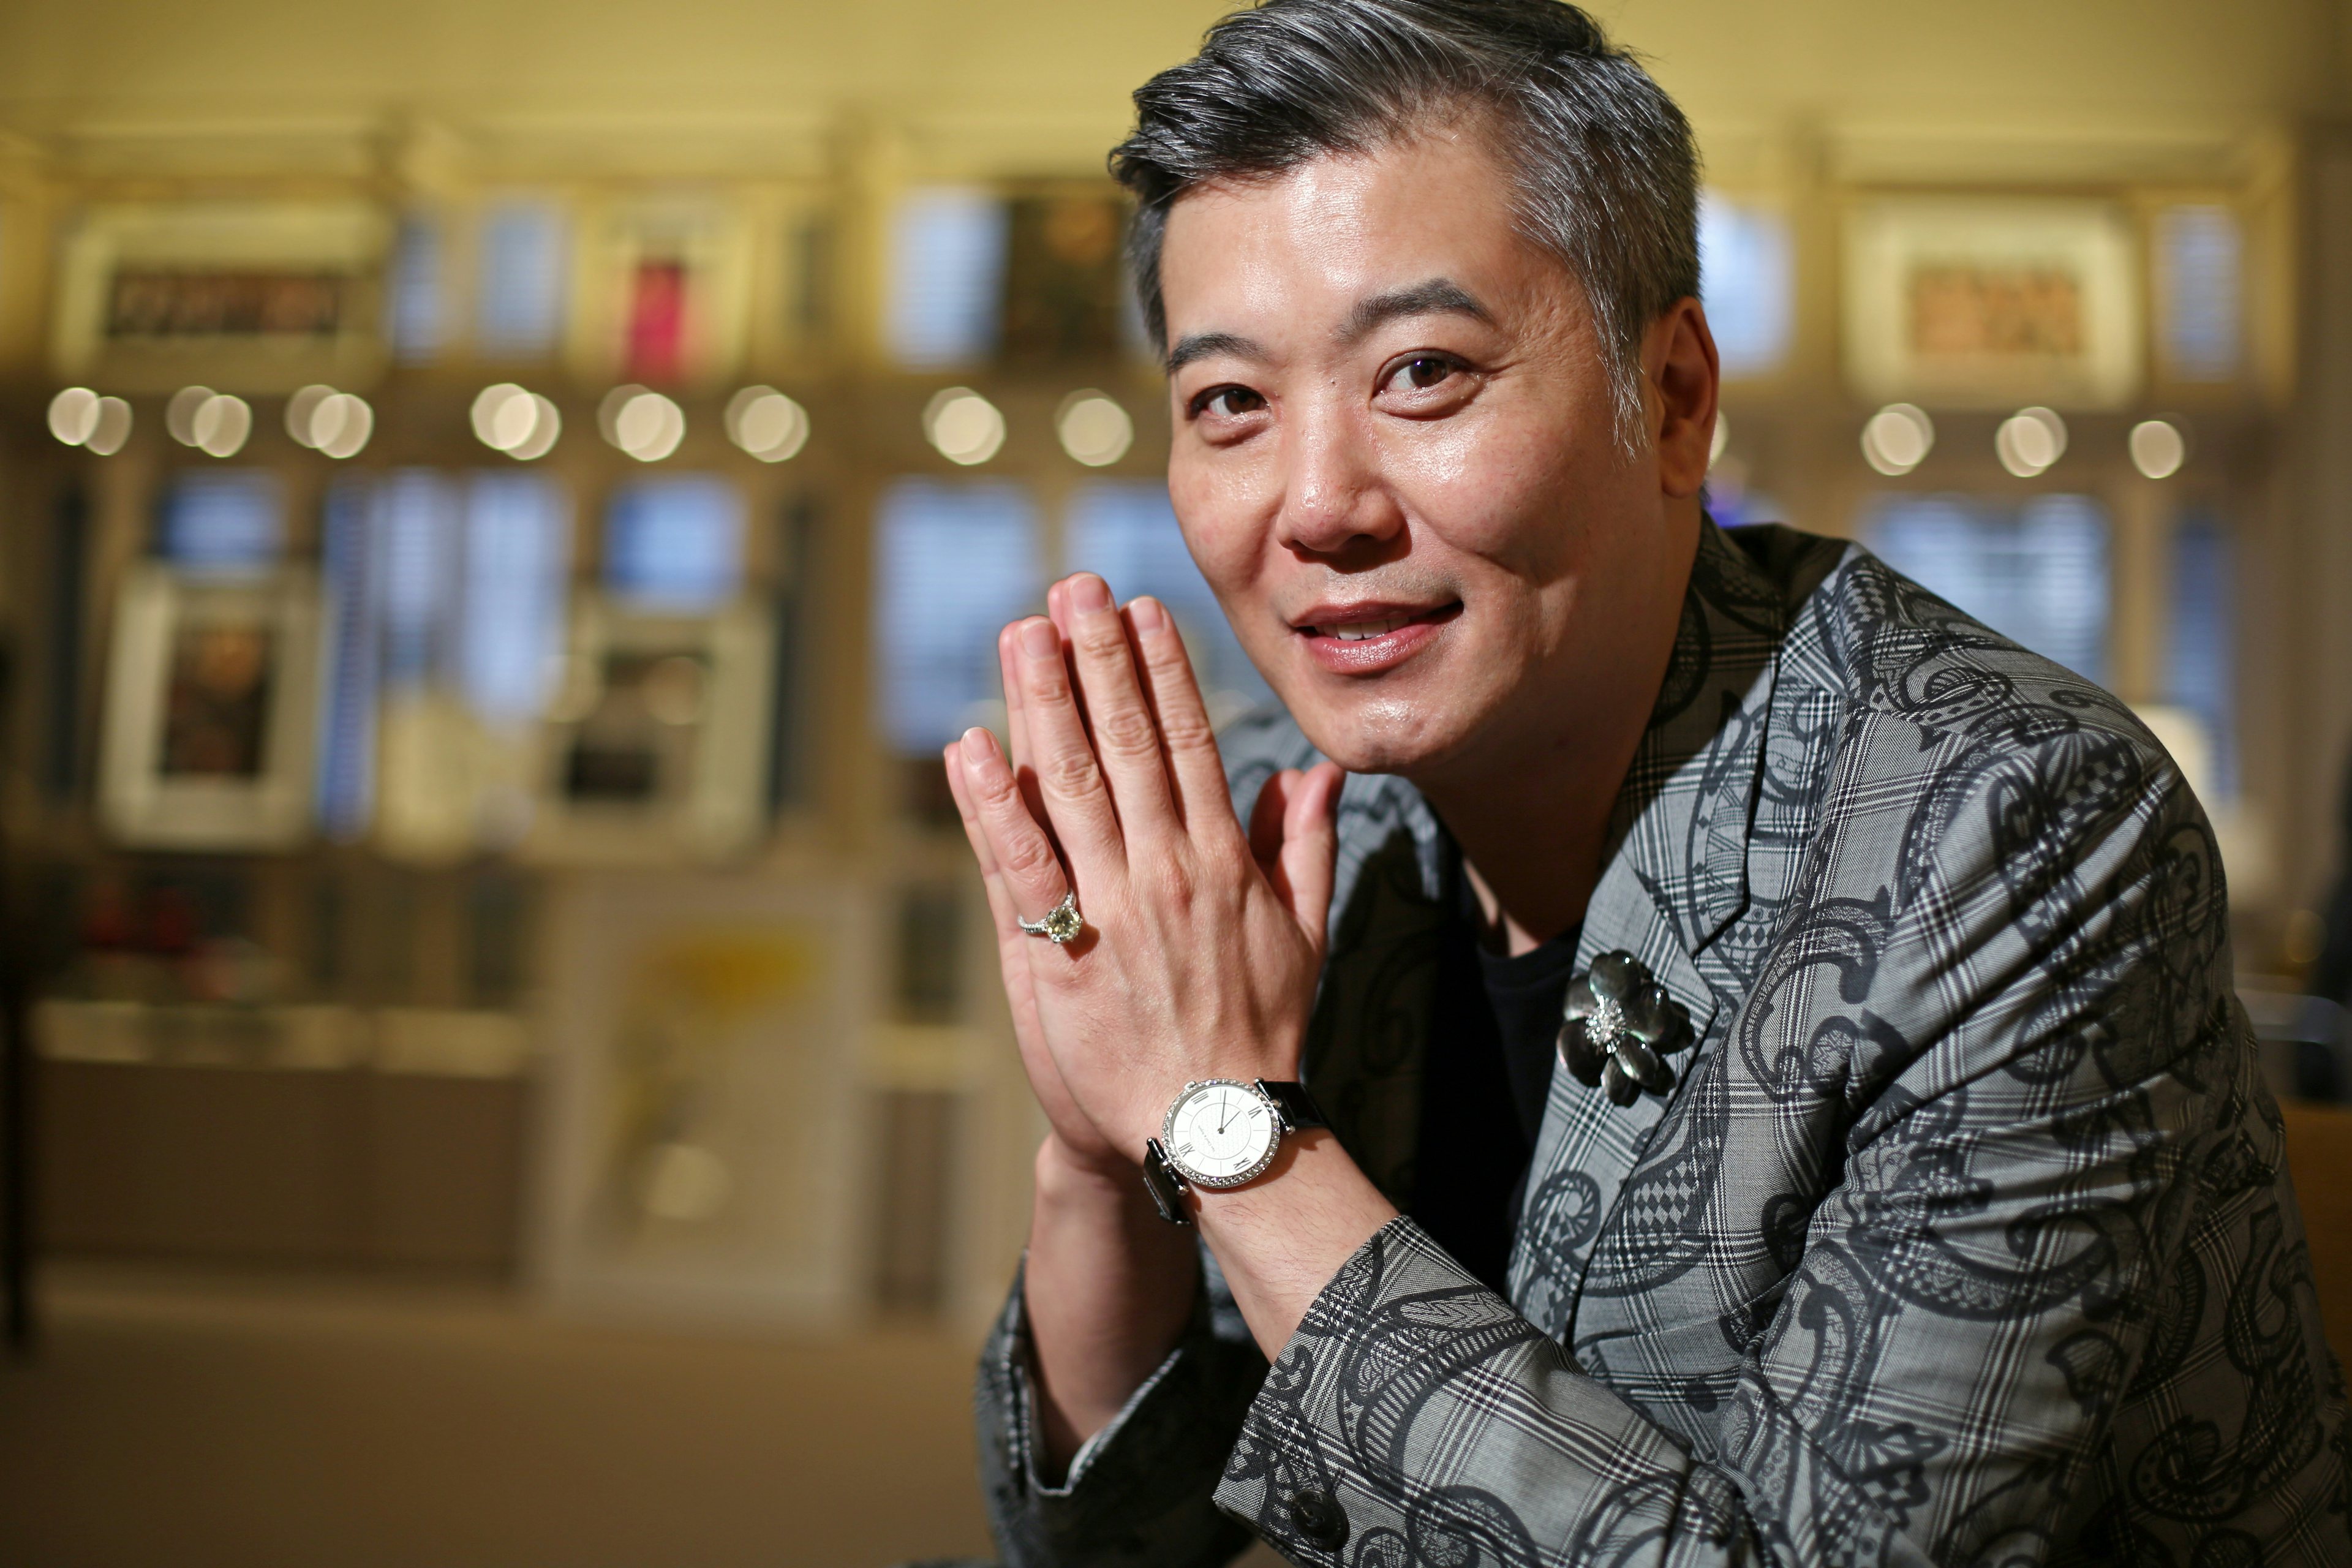 Luxury consultant Peter Cheung sports a Van Cleef & Arpels watch in Wan Chai, Hong Kong. Photo: Ghetty Images